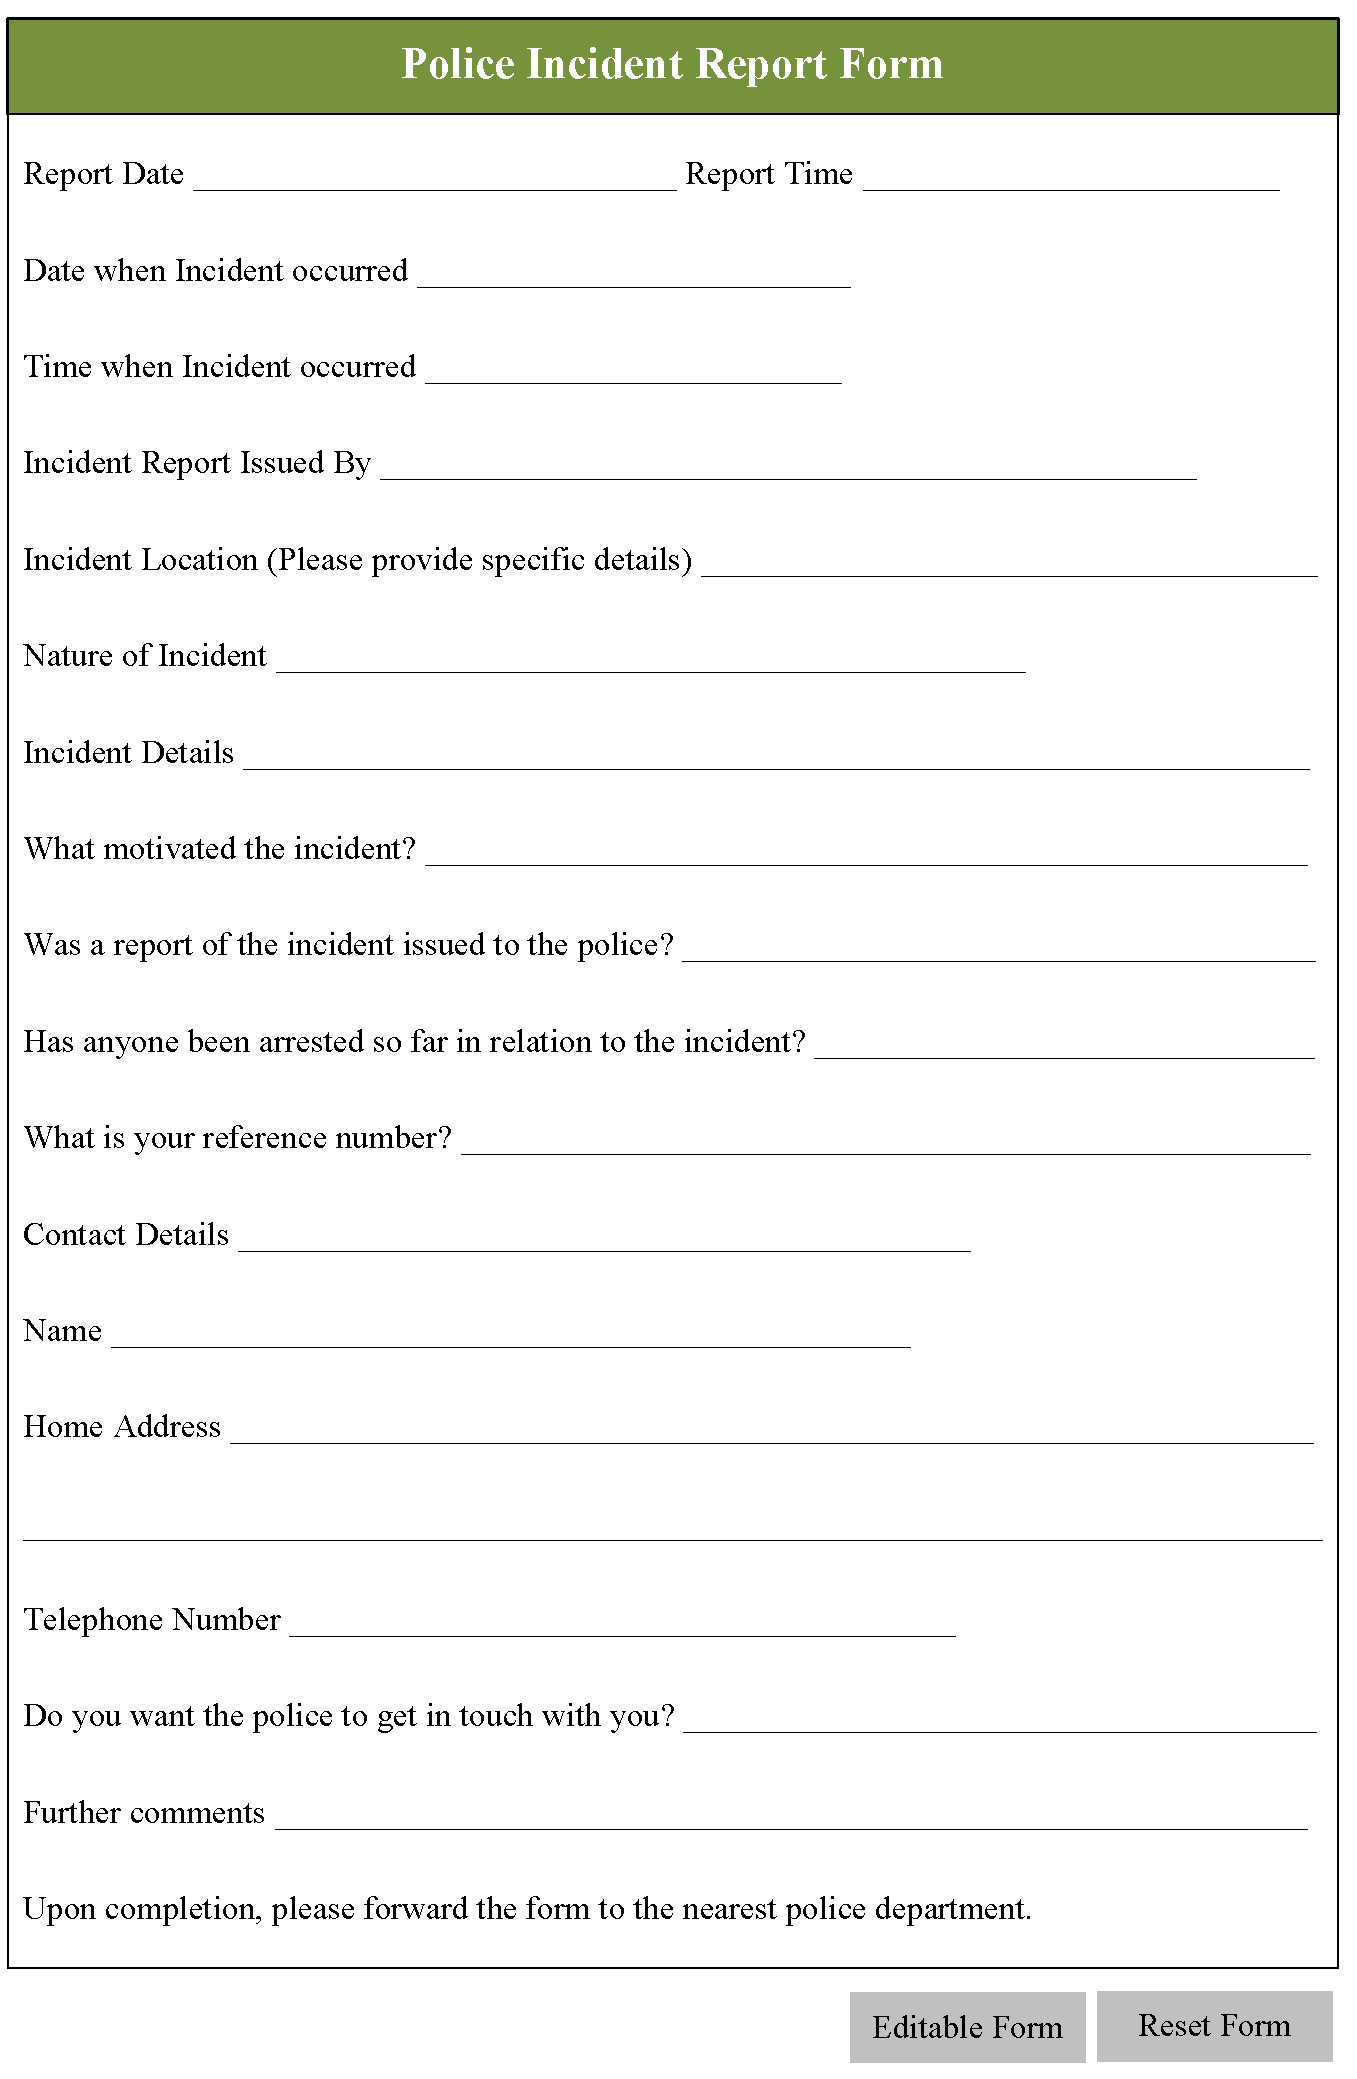 Incident Report Template Nz ] – Incident Accident Report Intended For Police Incident Report Template